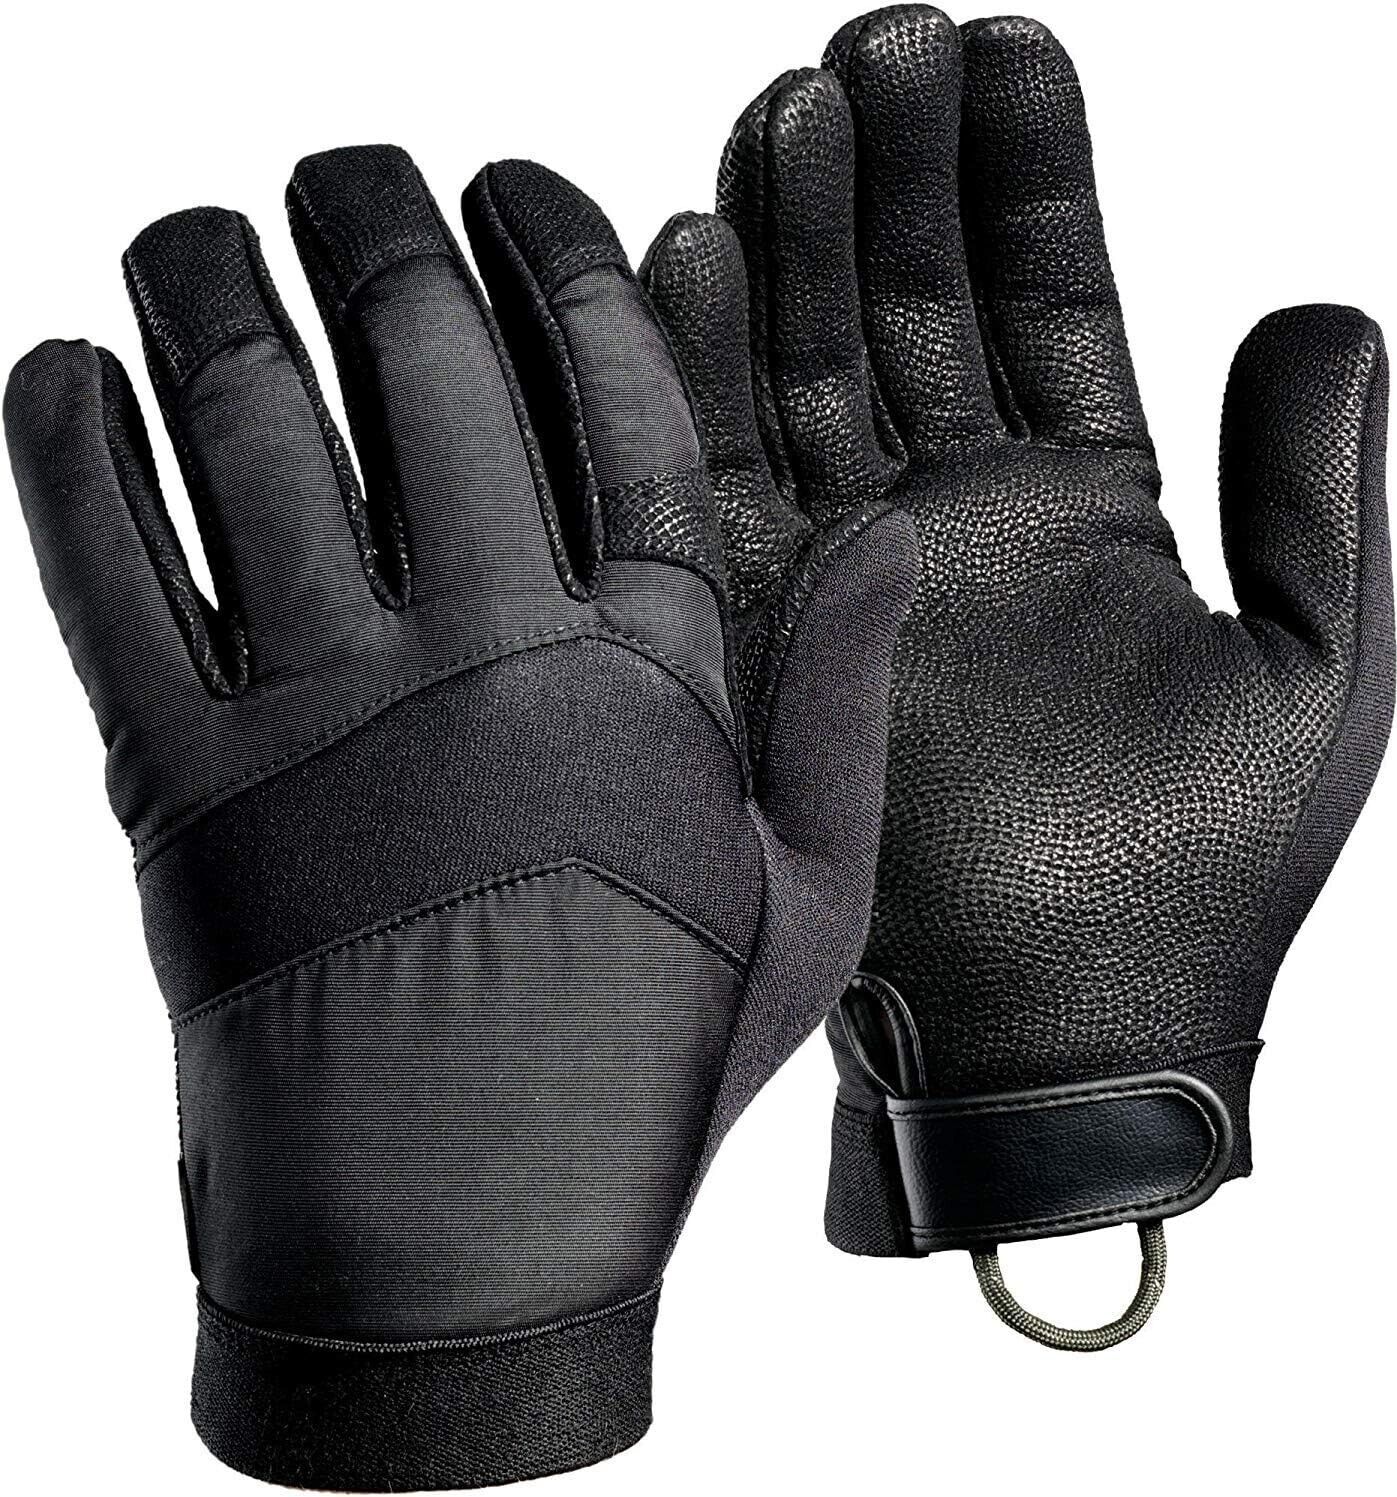 Camelbak CW05-12 Cold Weather Gloves, Specialty Series, Black, XXL, NEW